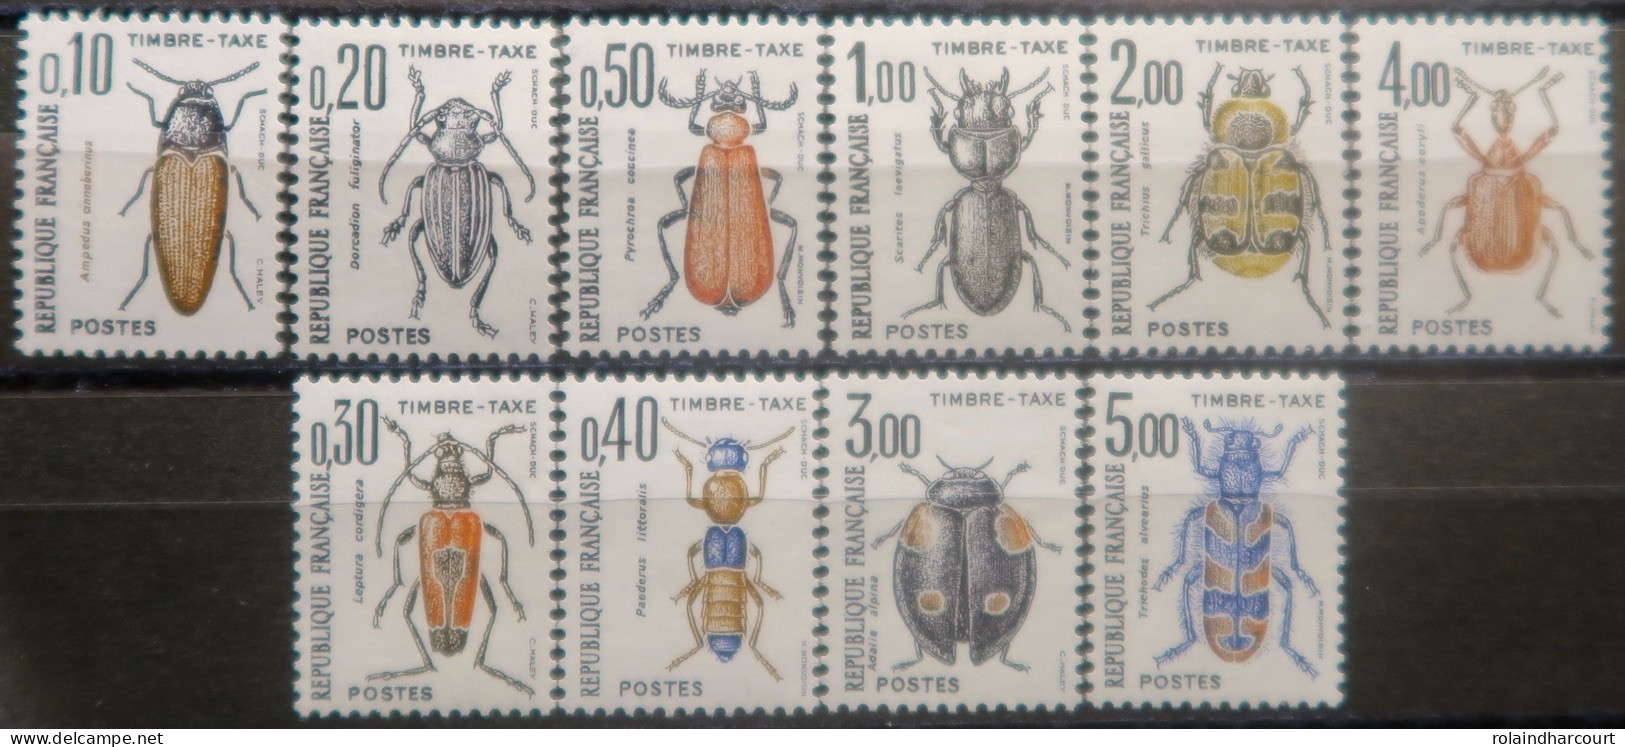 LP3969/379 - 1982/1993 - TIMBRES TAXE - INSECTES - SERIE COMPLETE - N°103 à 112 NEUFS** - 1960-.... Nuevos